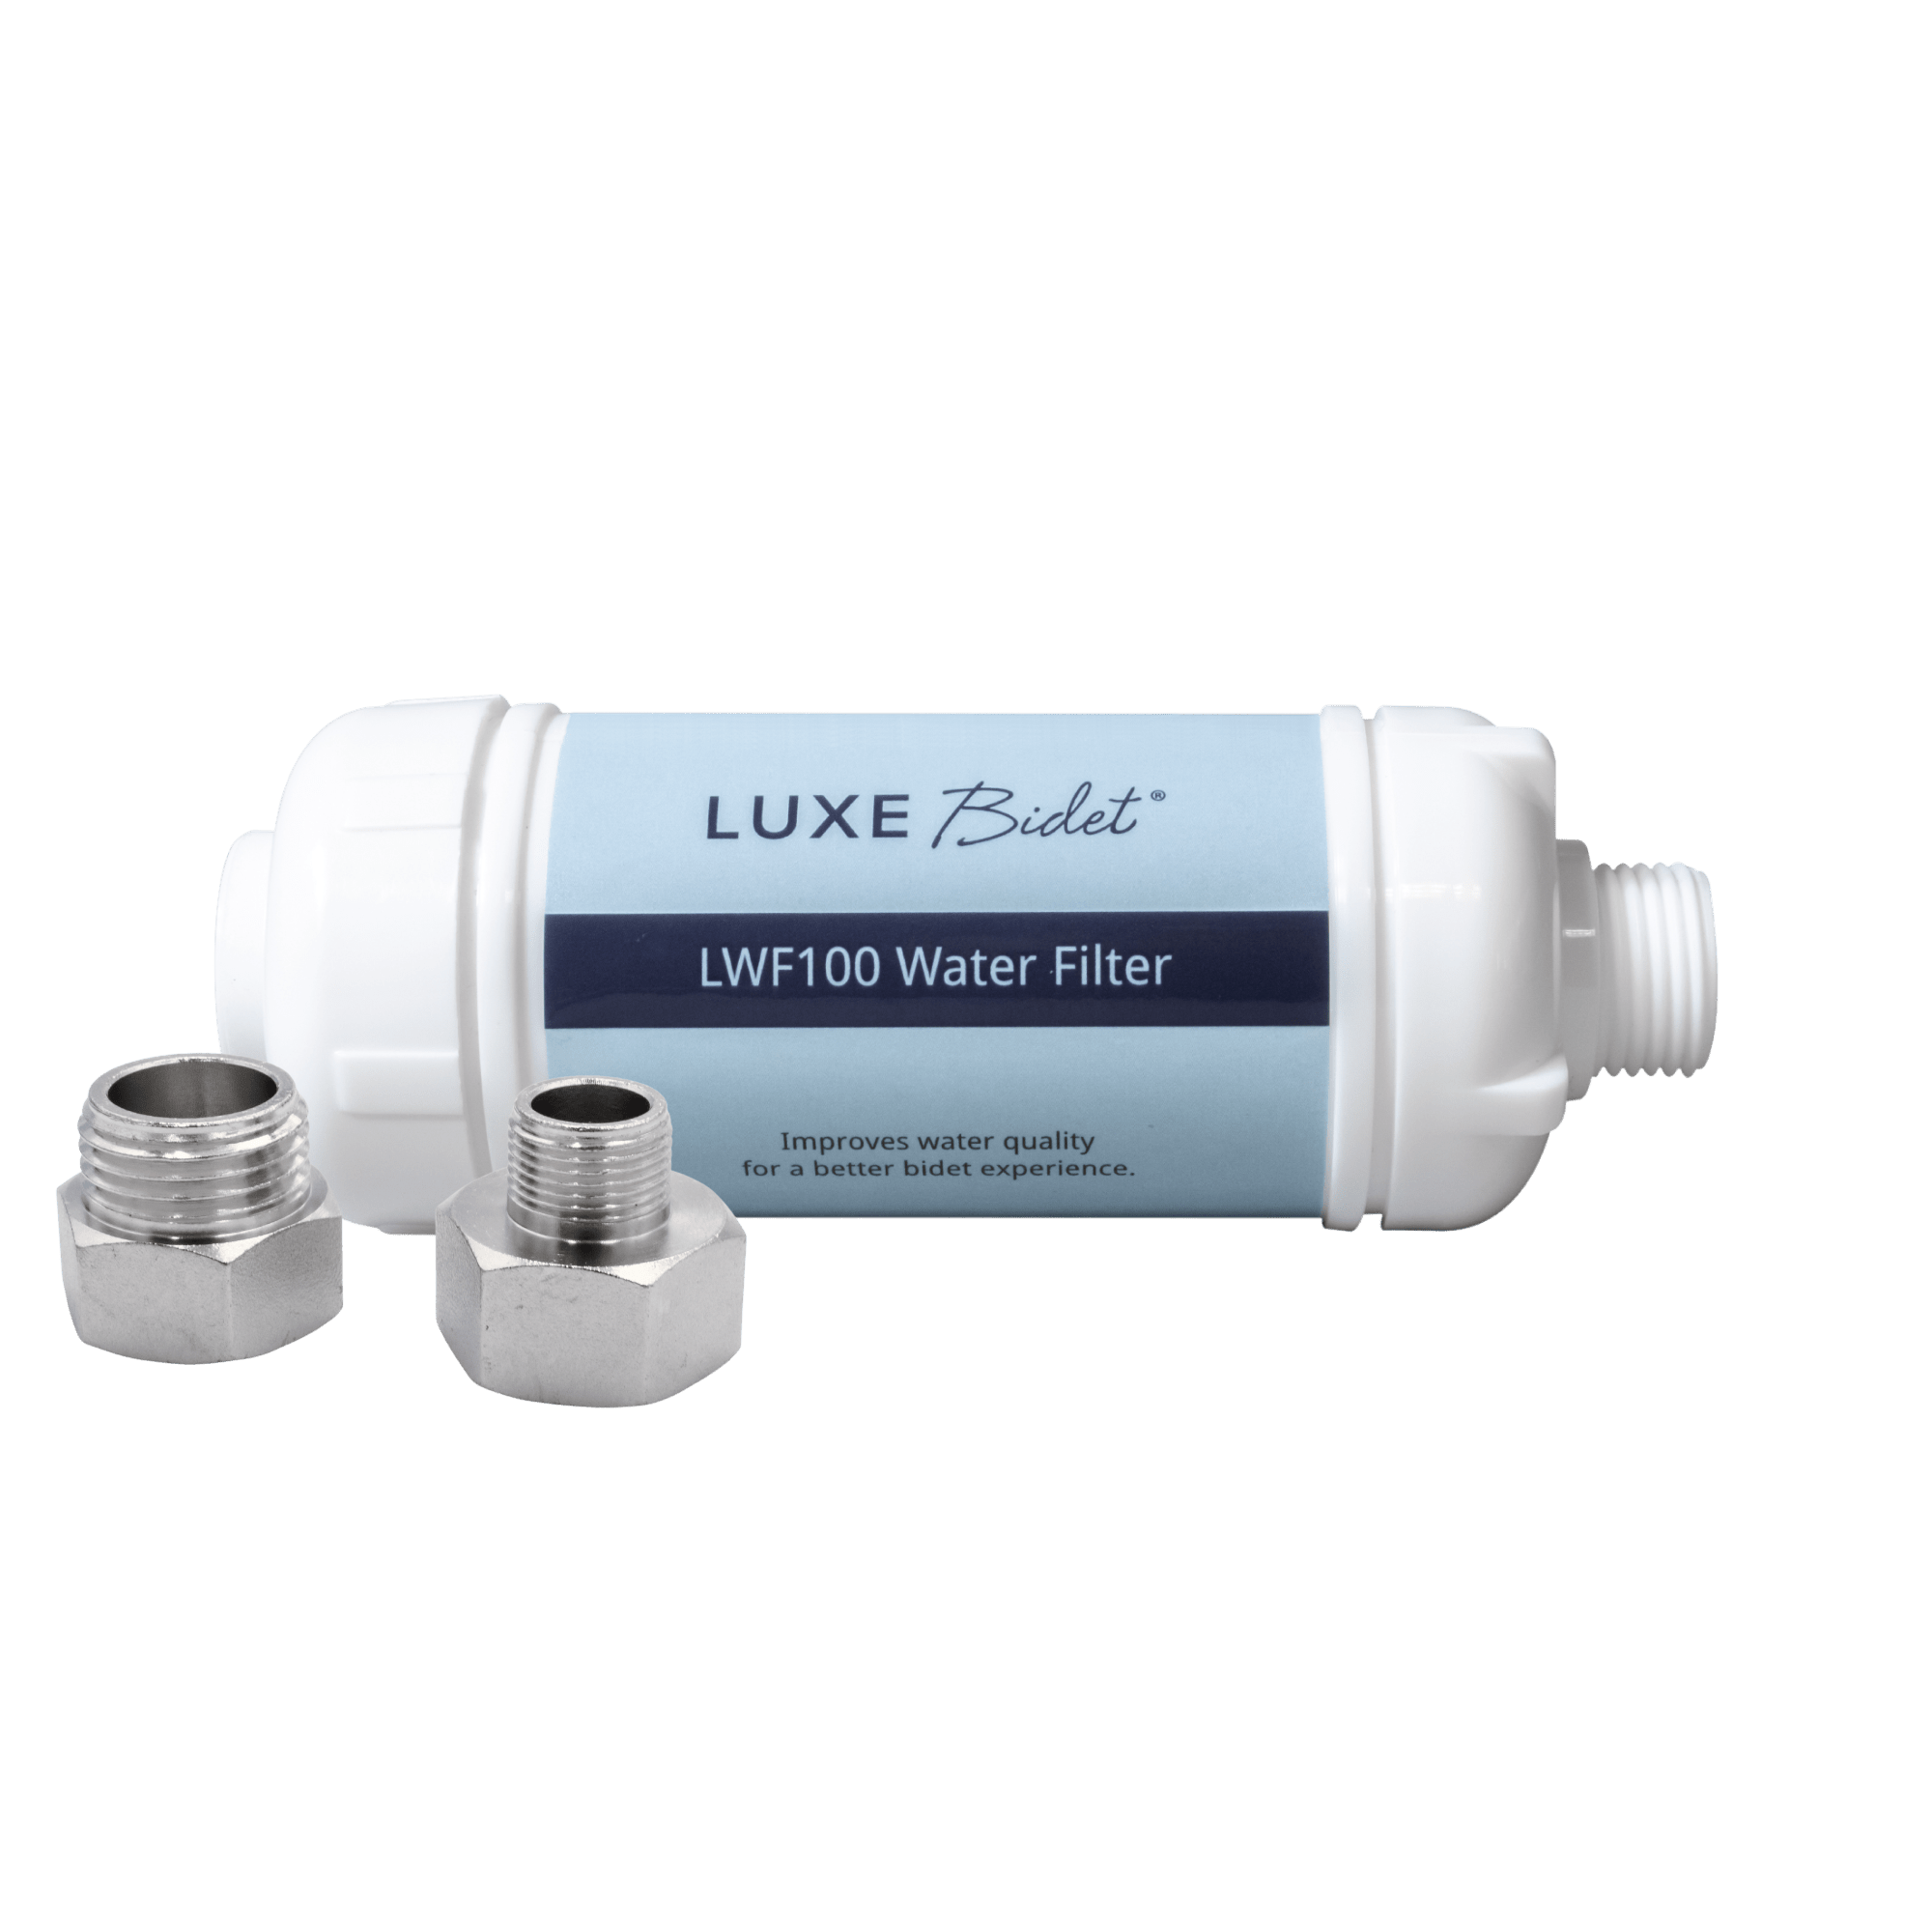 LUXE Bidet 4-in-1 Filtration Water Filter with 3/8